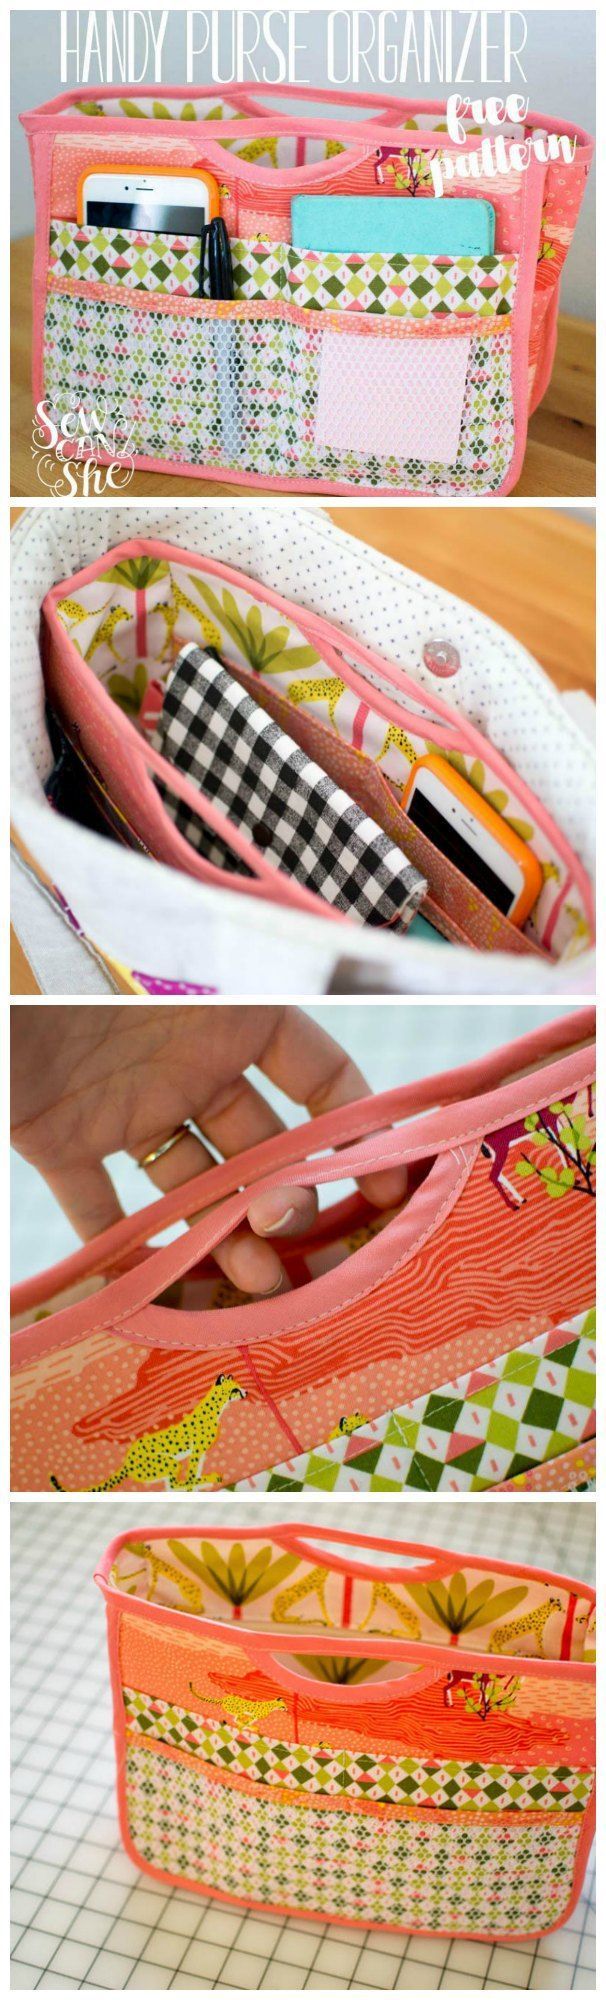 Free sewing pattern for this smart purse organizer. I love using these to transfer